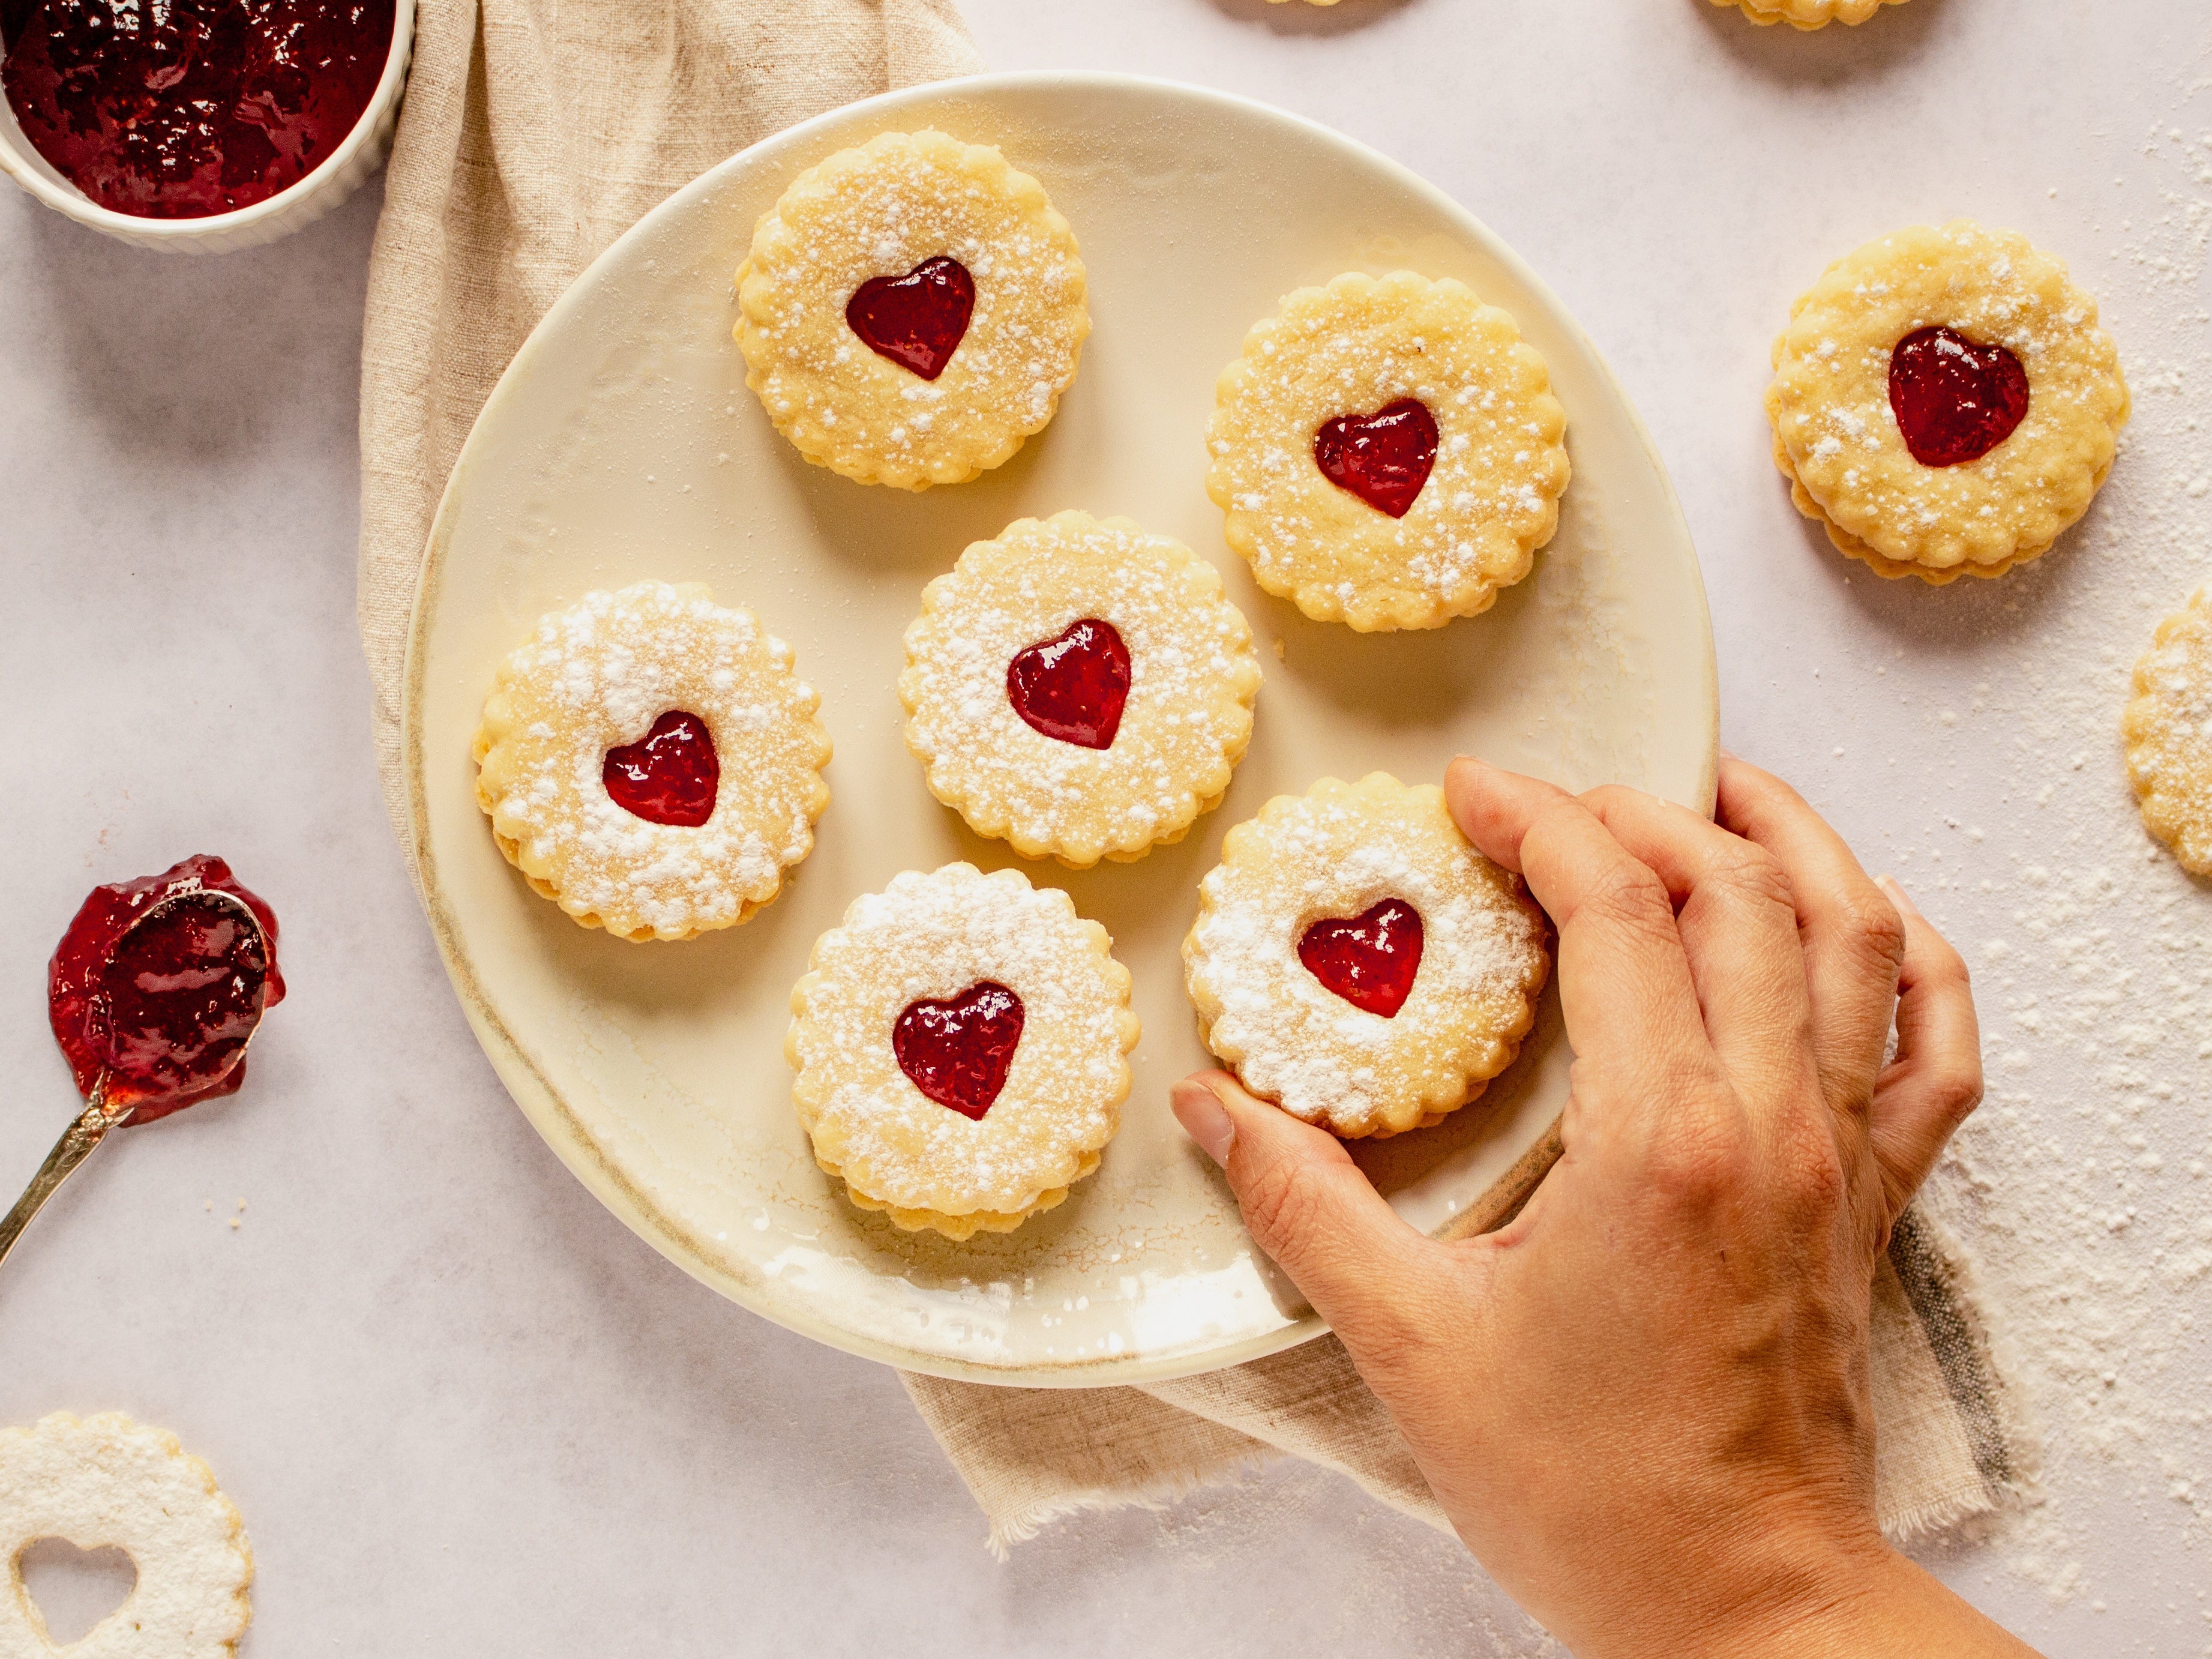 Six homemade jammy dodgers on a white plate with a hand reaching for them